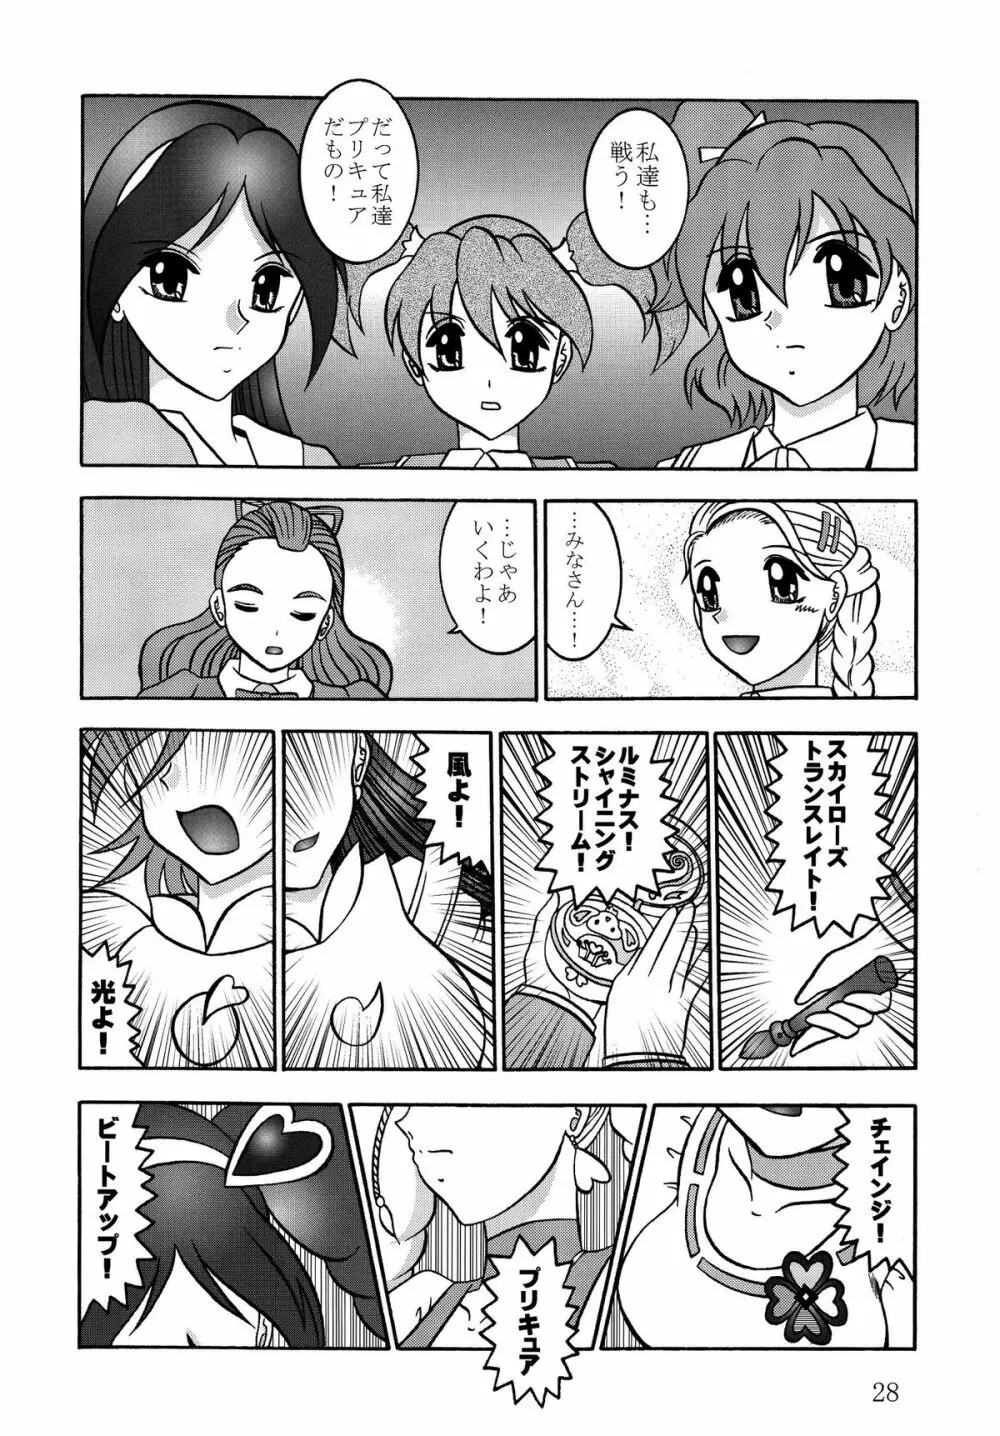 GREATEST ECLIPSE Stardust SEED～星散～ Page.28